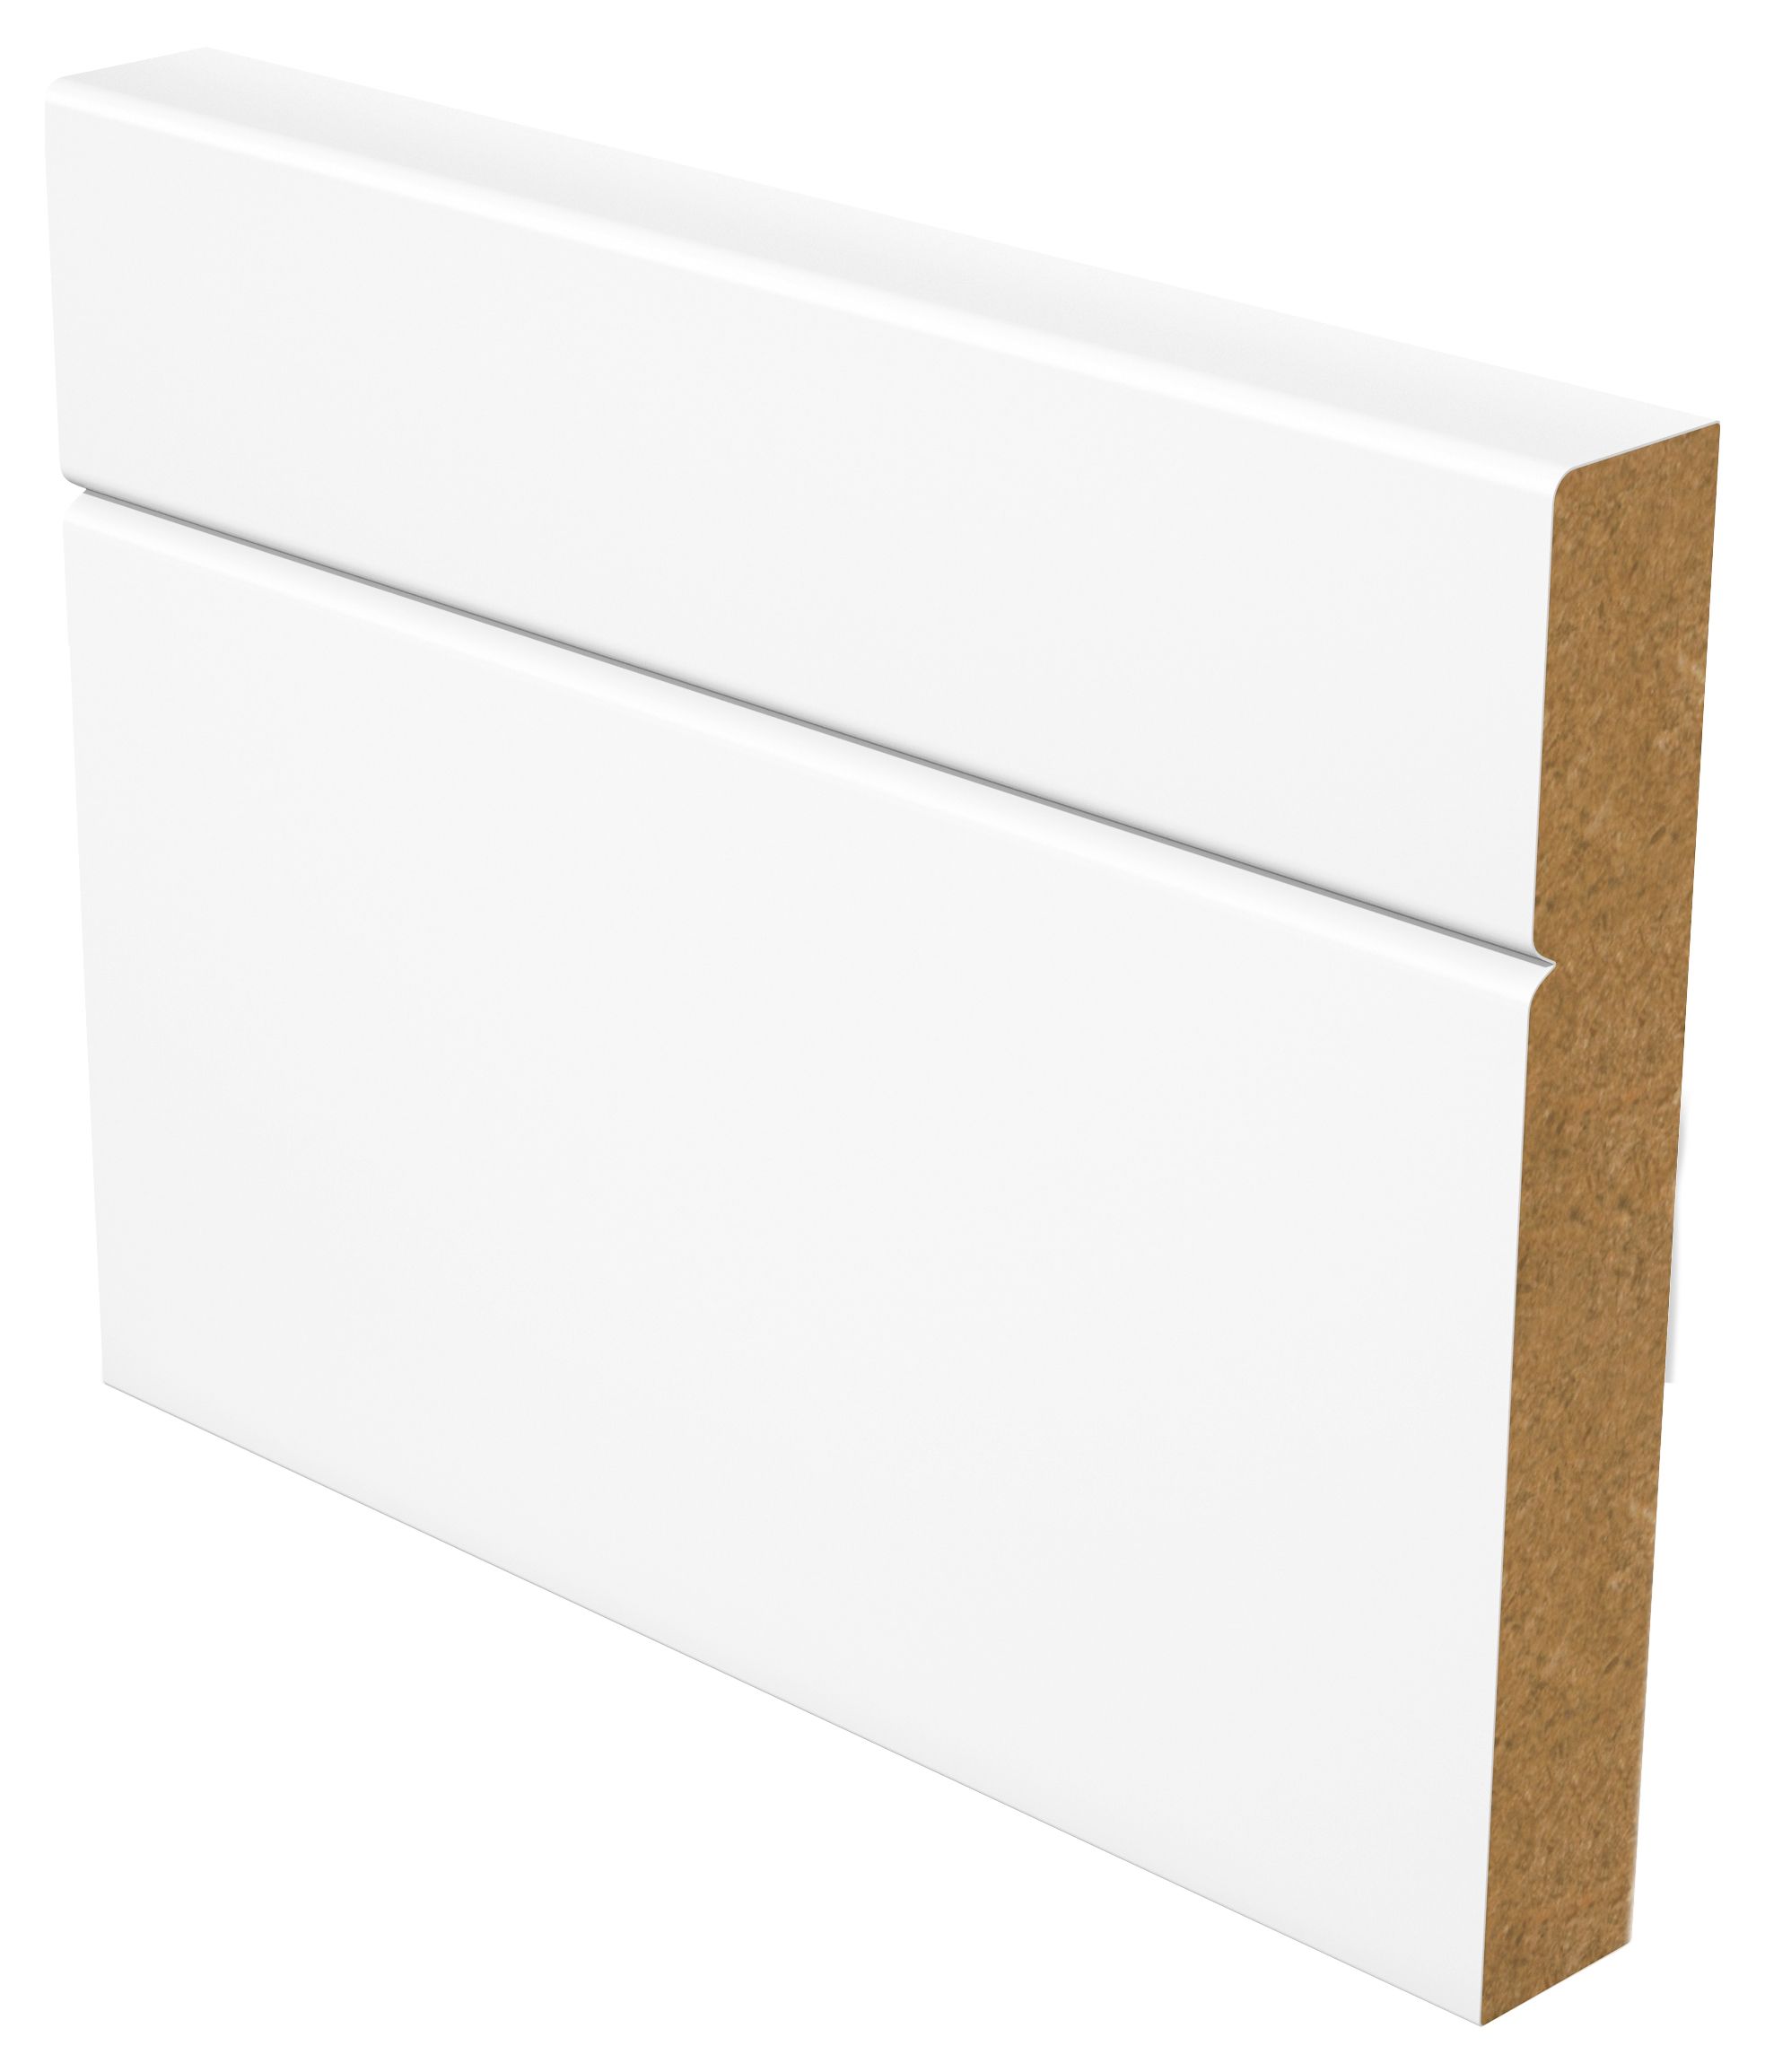 Image of Wickes V-Groove White MDF Skirting - 18 x 144 x 4200mm